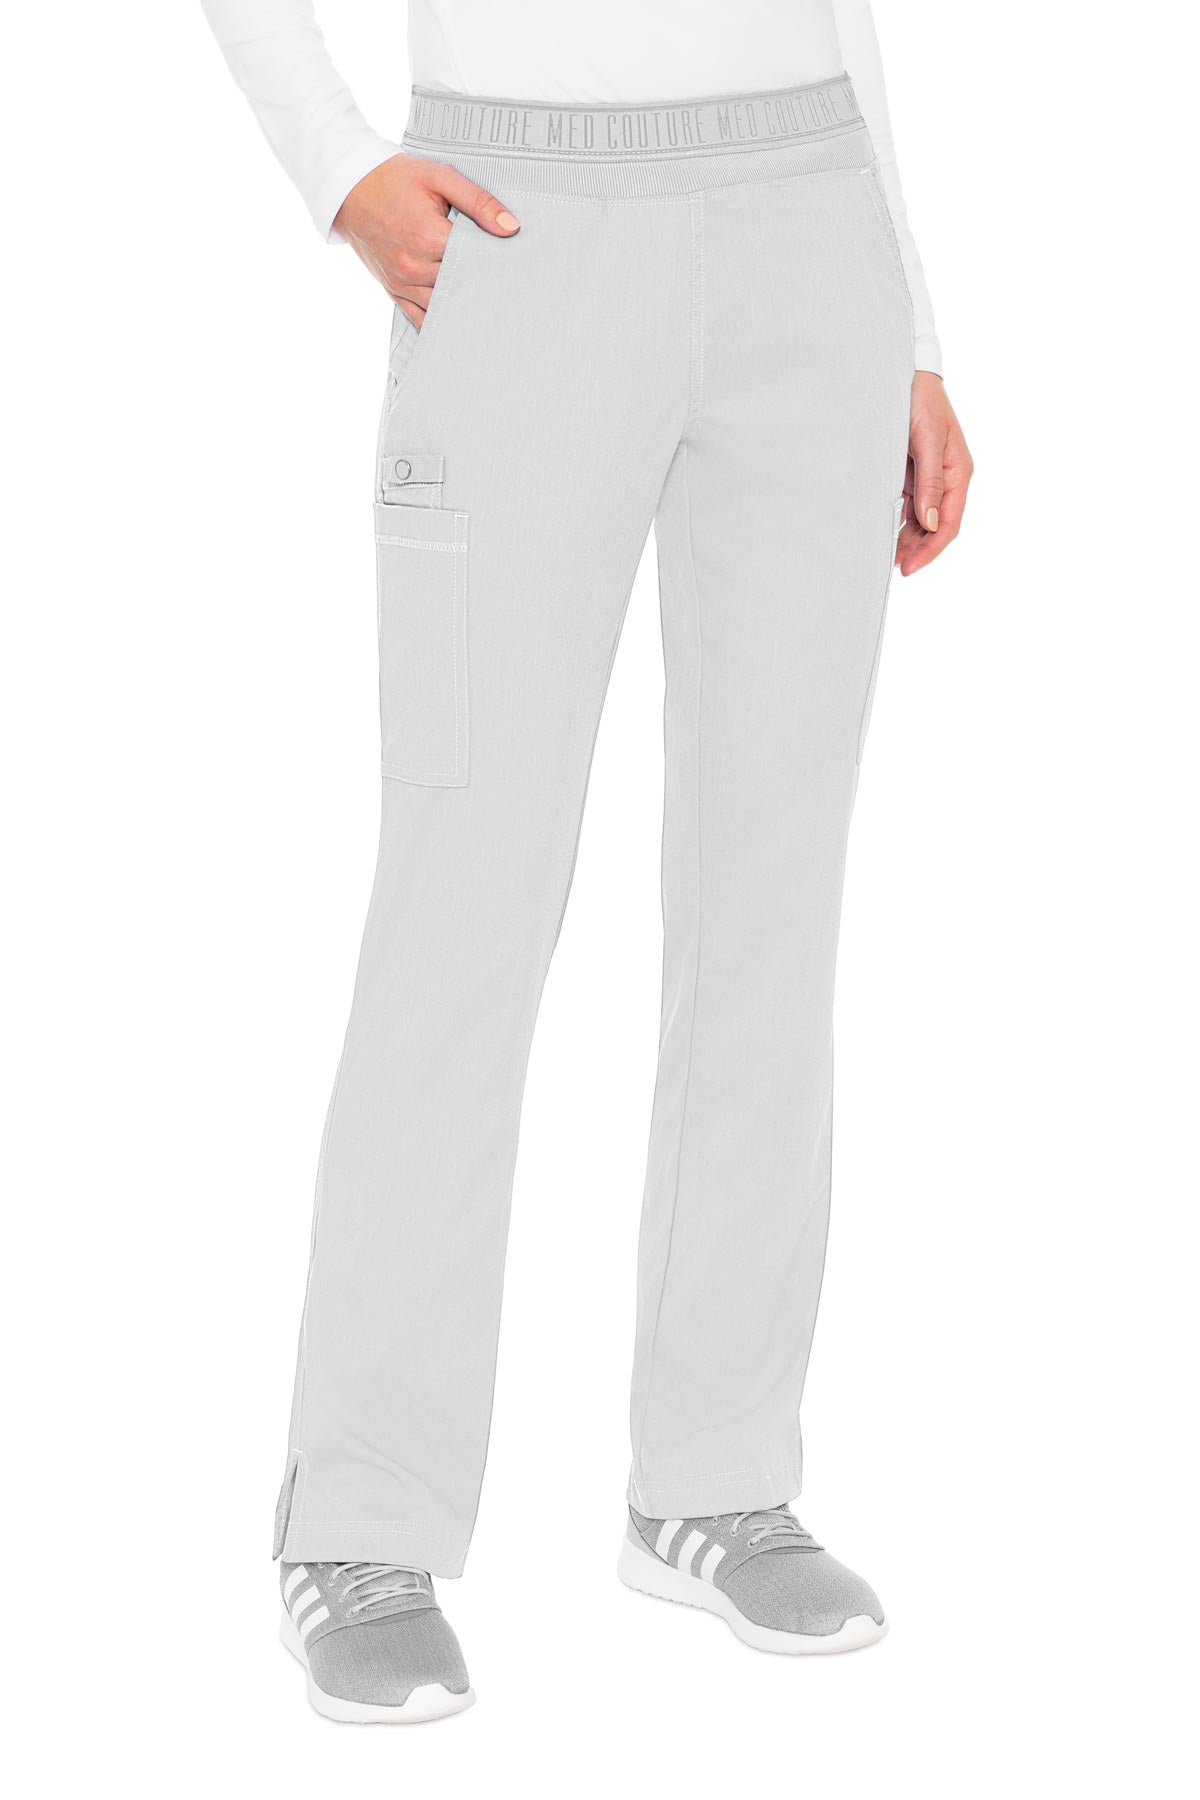 MED COUTURE Yoga 2 Cargo Pocket Pant TALL